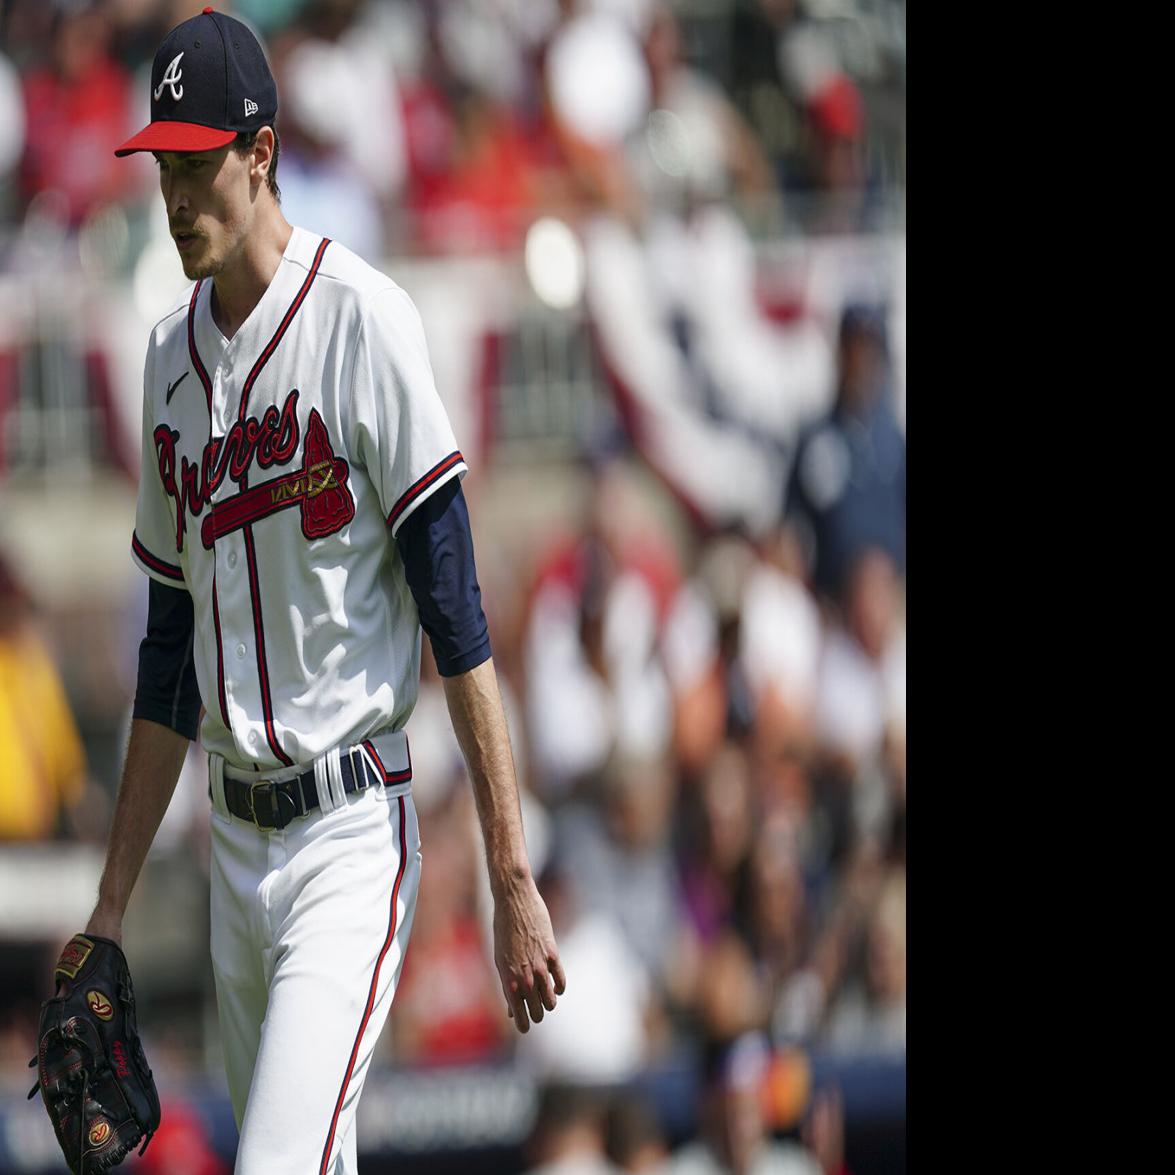 Braves players visit Montgomery to meet fans